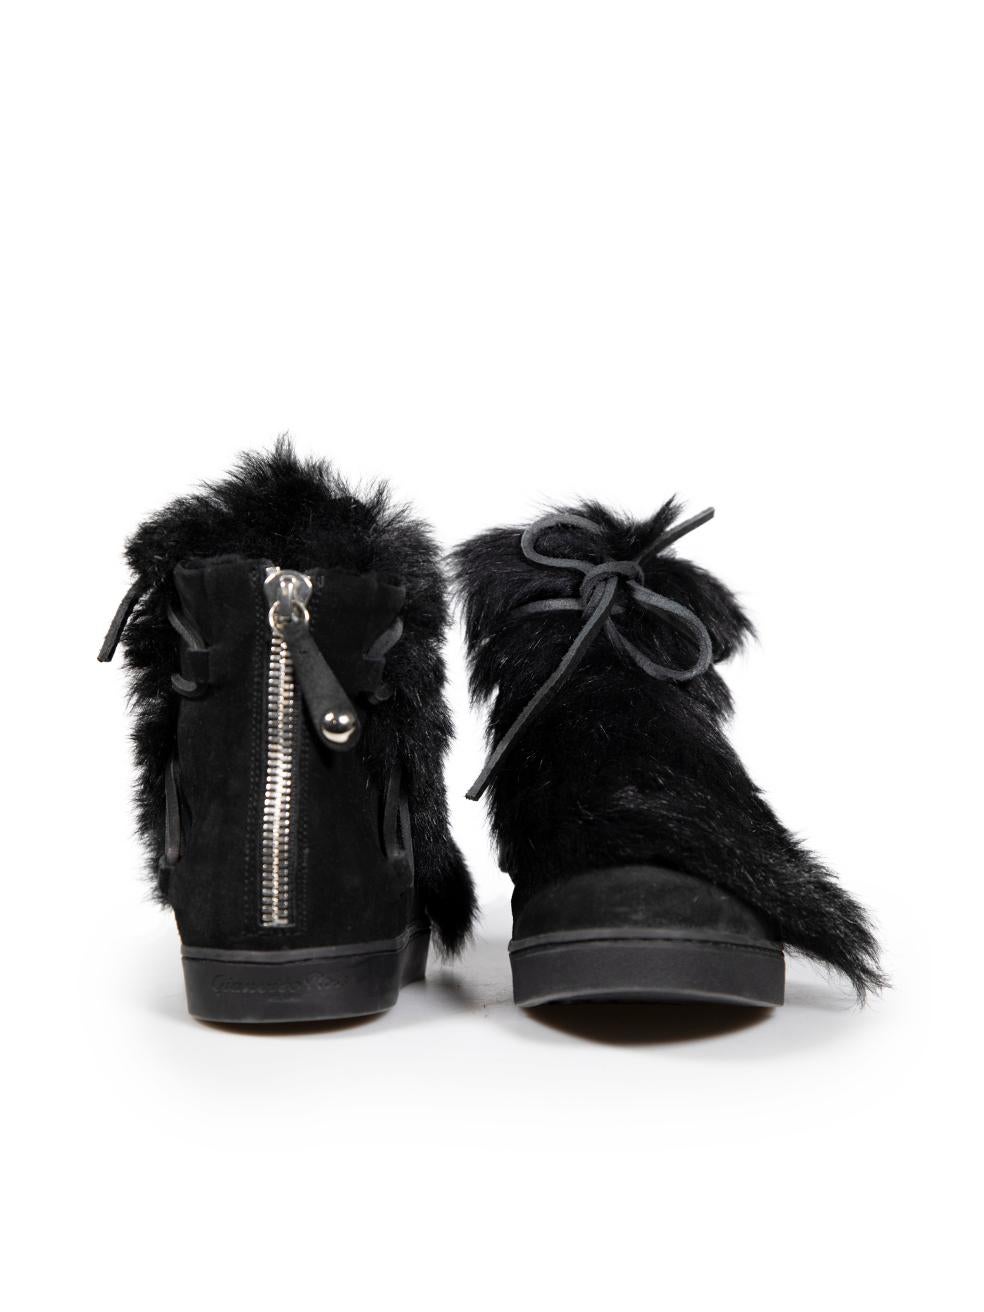 Gianvito Rossi Black Fur Winter Boots Size IT 36.5 In Good Condition For Sale In London, GB